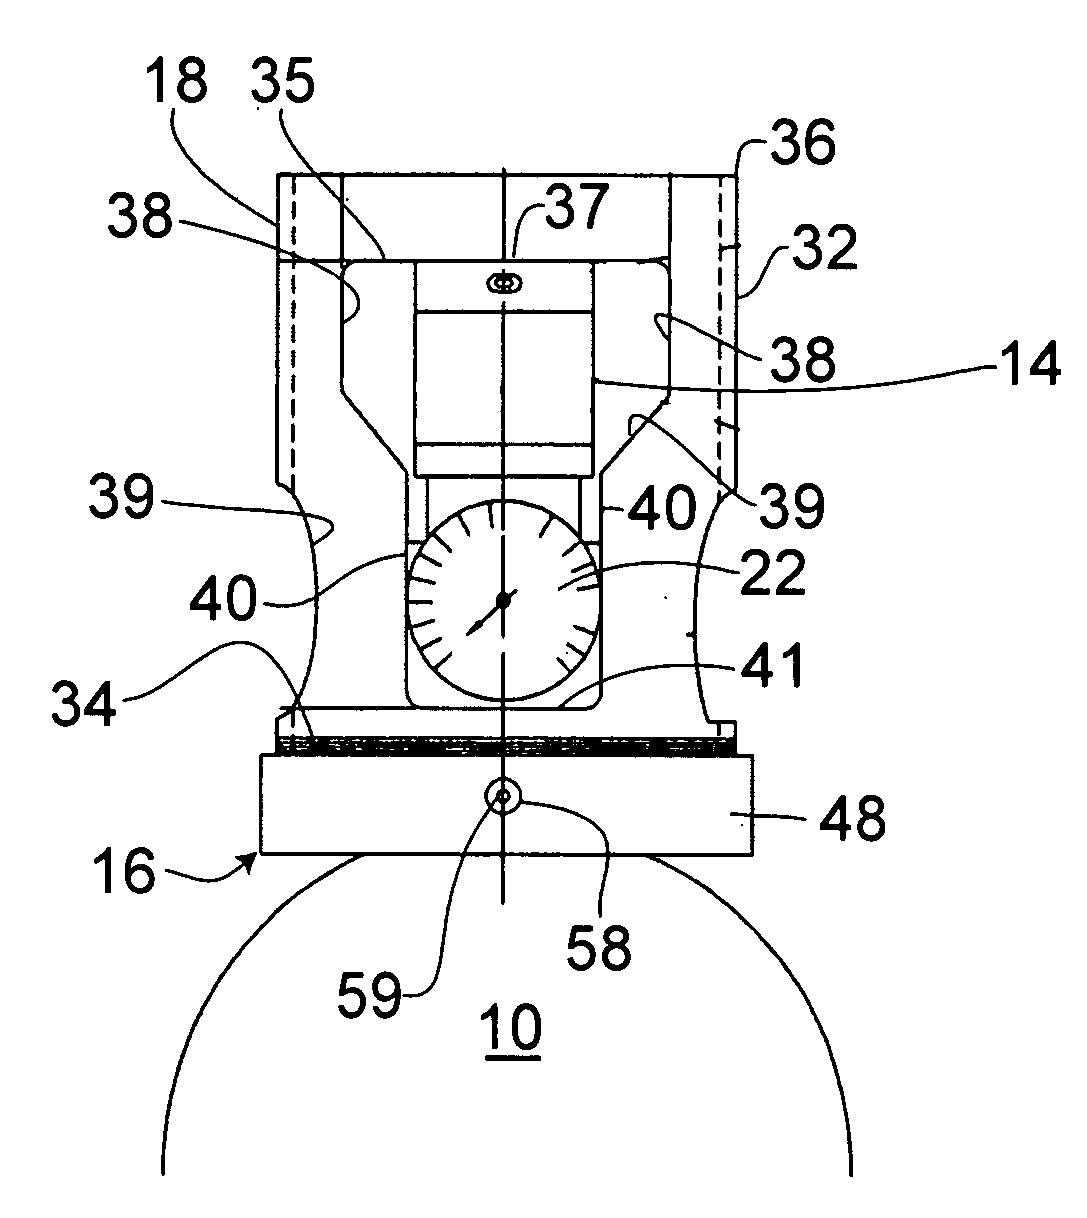 Pressurized gas containing system